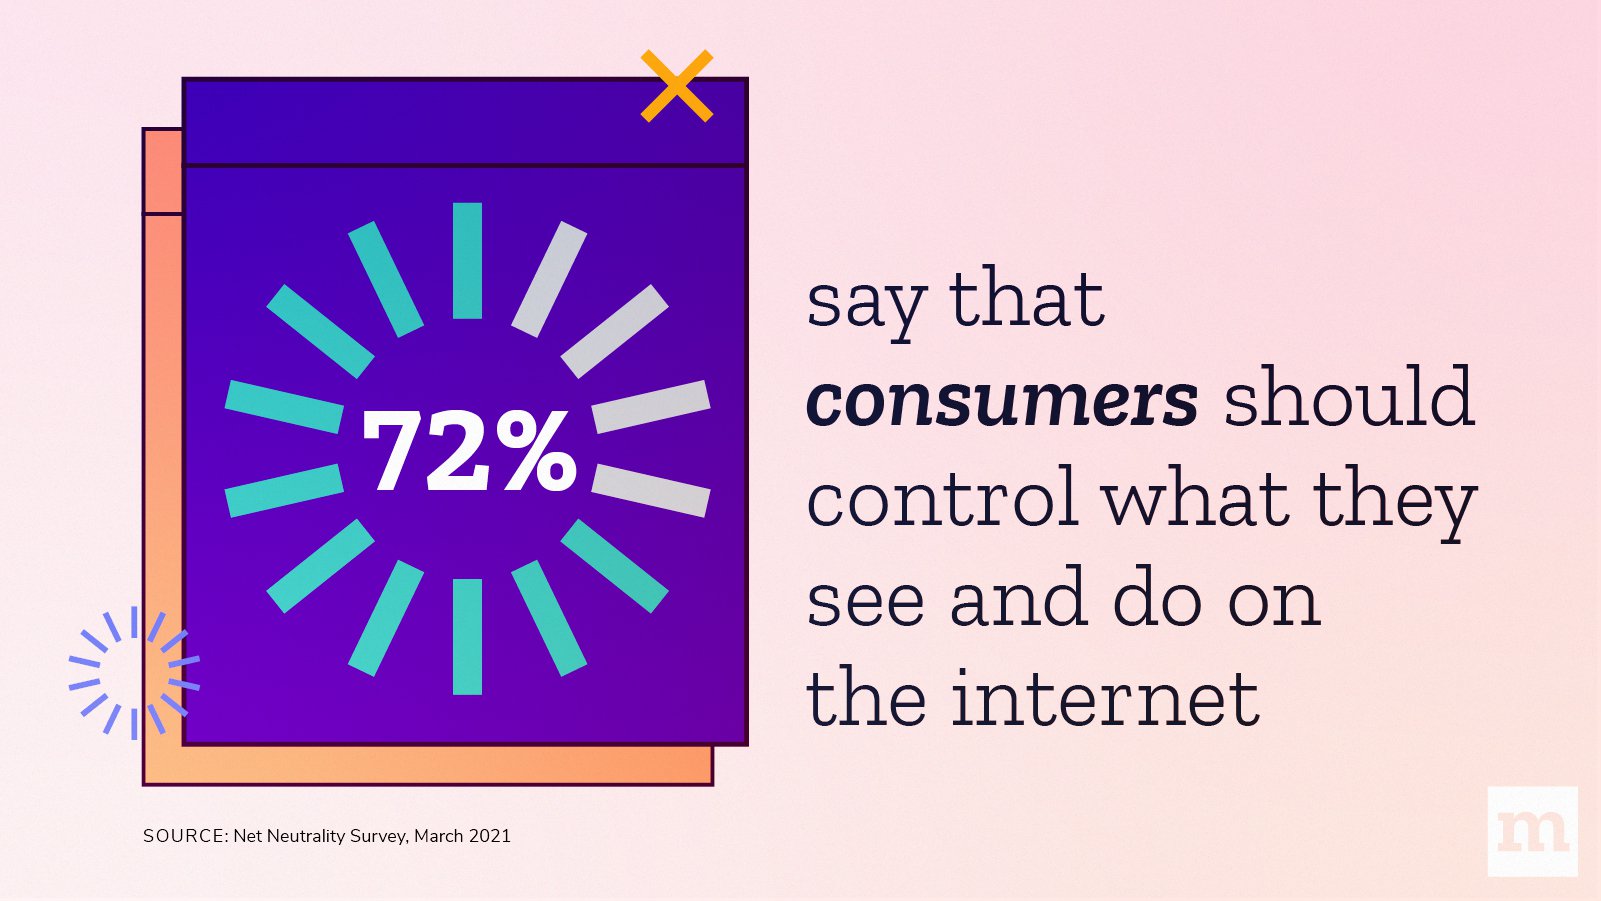 72% say that consumers should control what they see and do on the internet